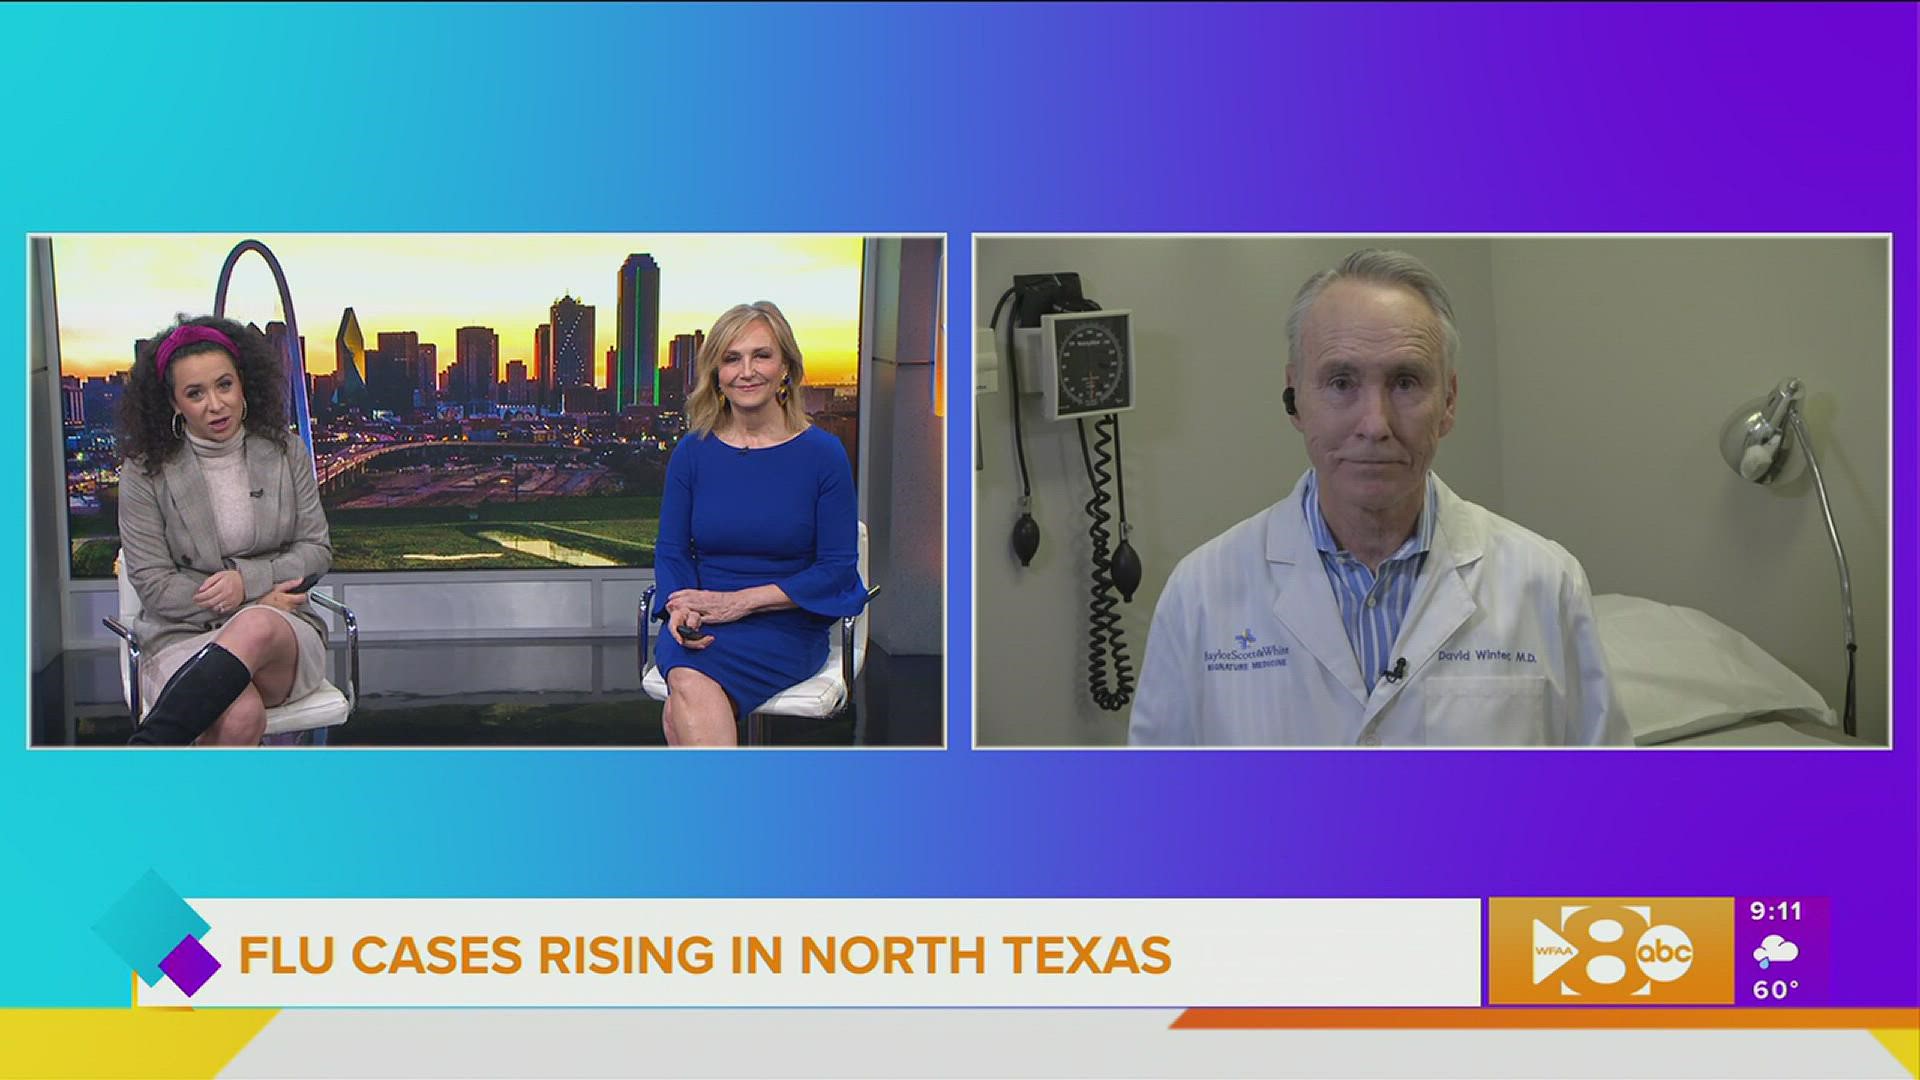 Dr. David Winter with Baylor Scott & White Health update us on how to stay safe this cold and flu season.